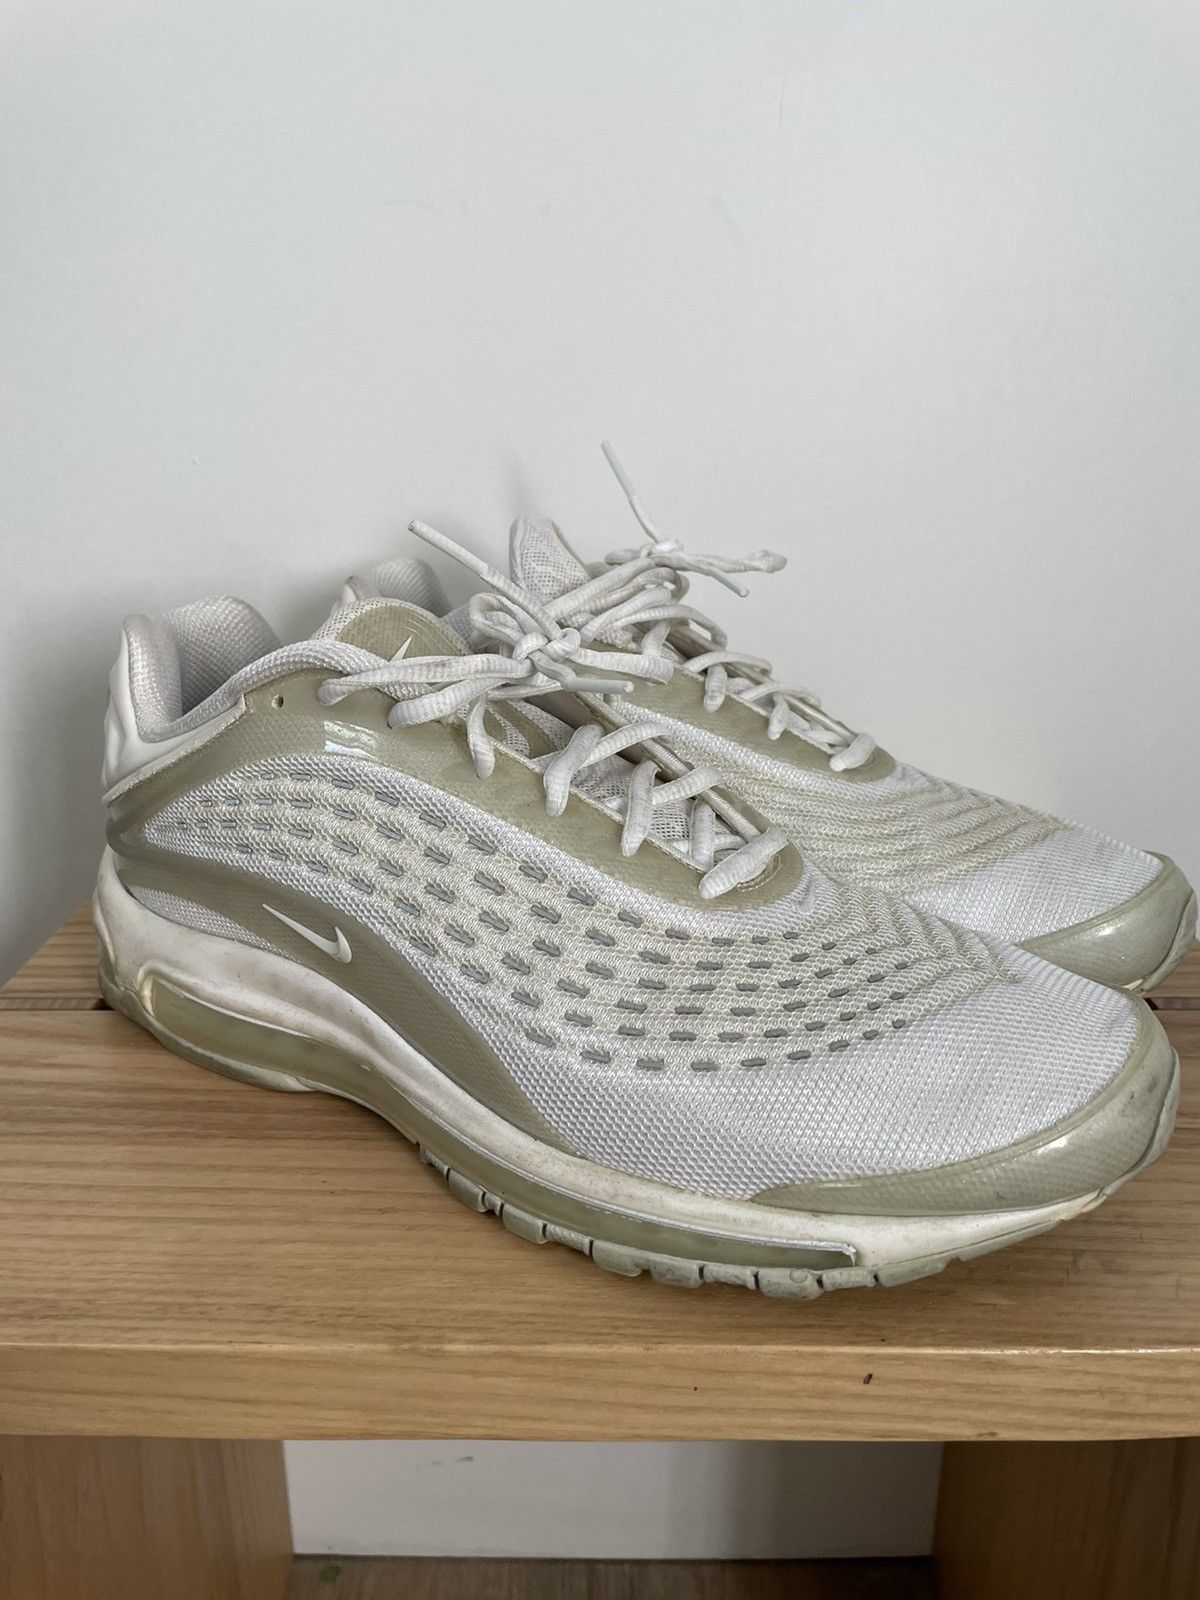 Nike Air Max Deluxe Pure Platinum 2018 Size US 10.5 / EU 43-44 - 2 Preview